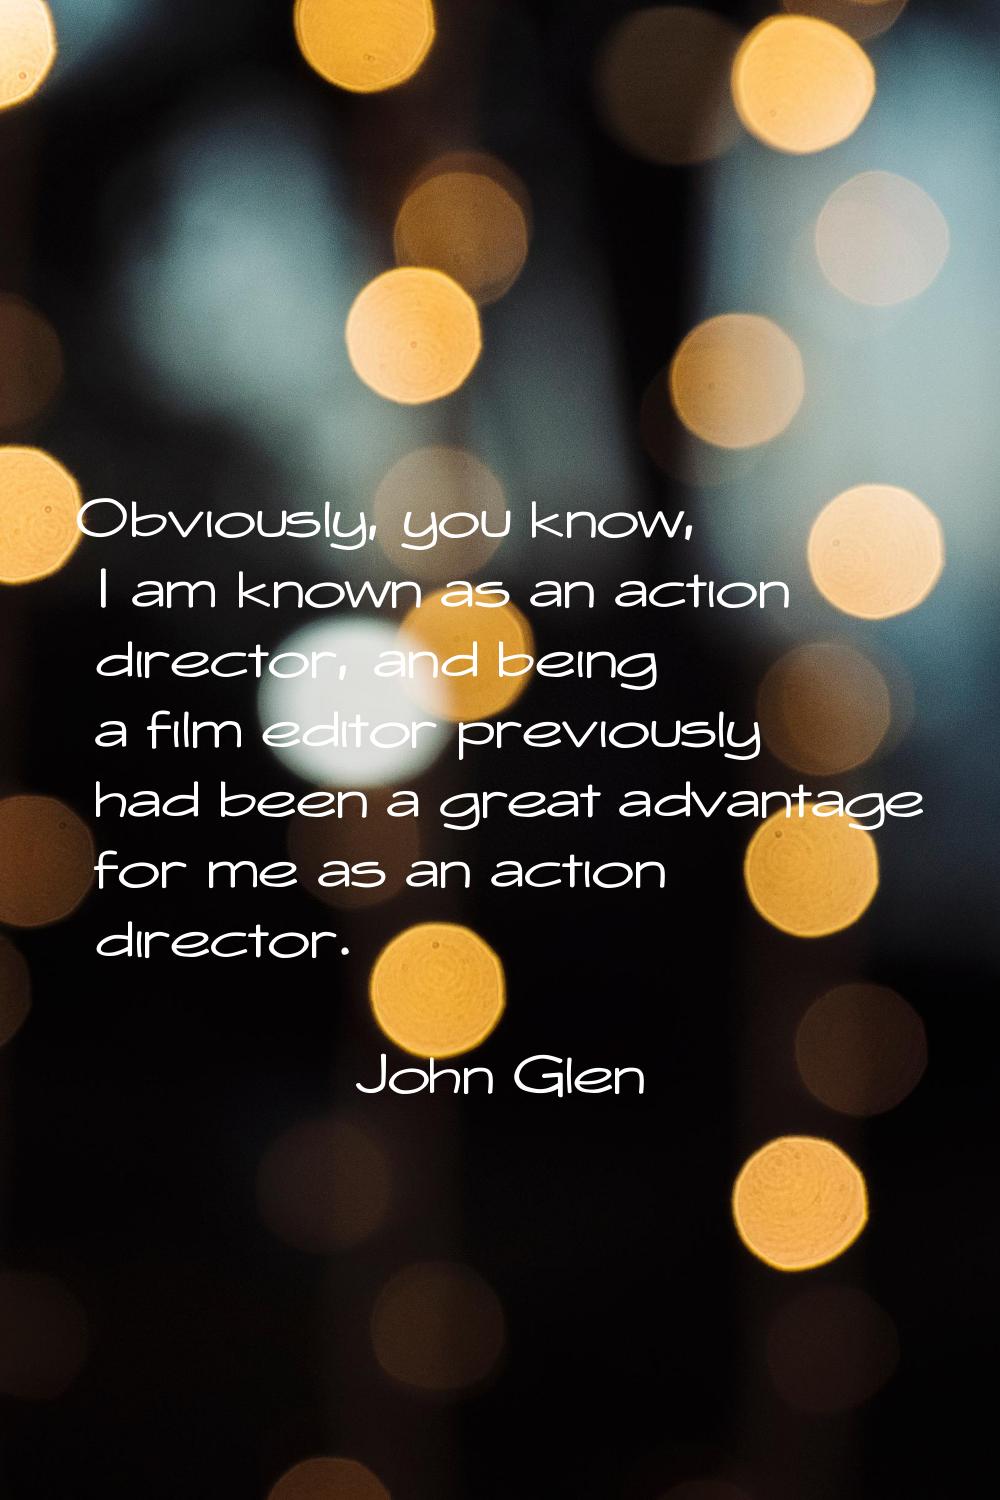 Obviously, you know, I am known as an action director, and being a film editor previously had been 